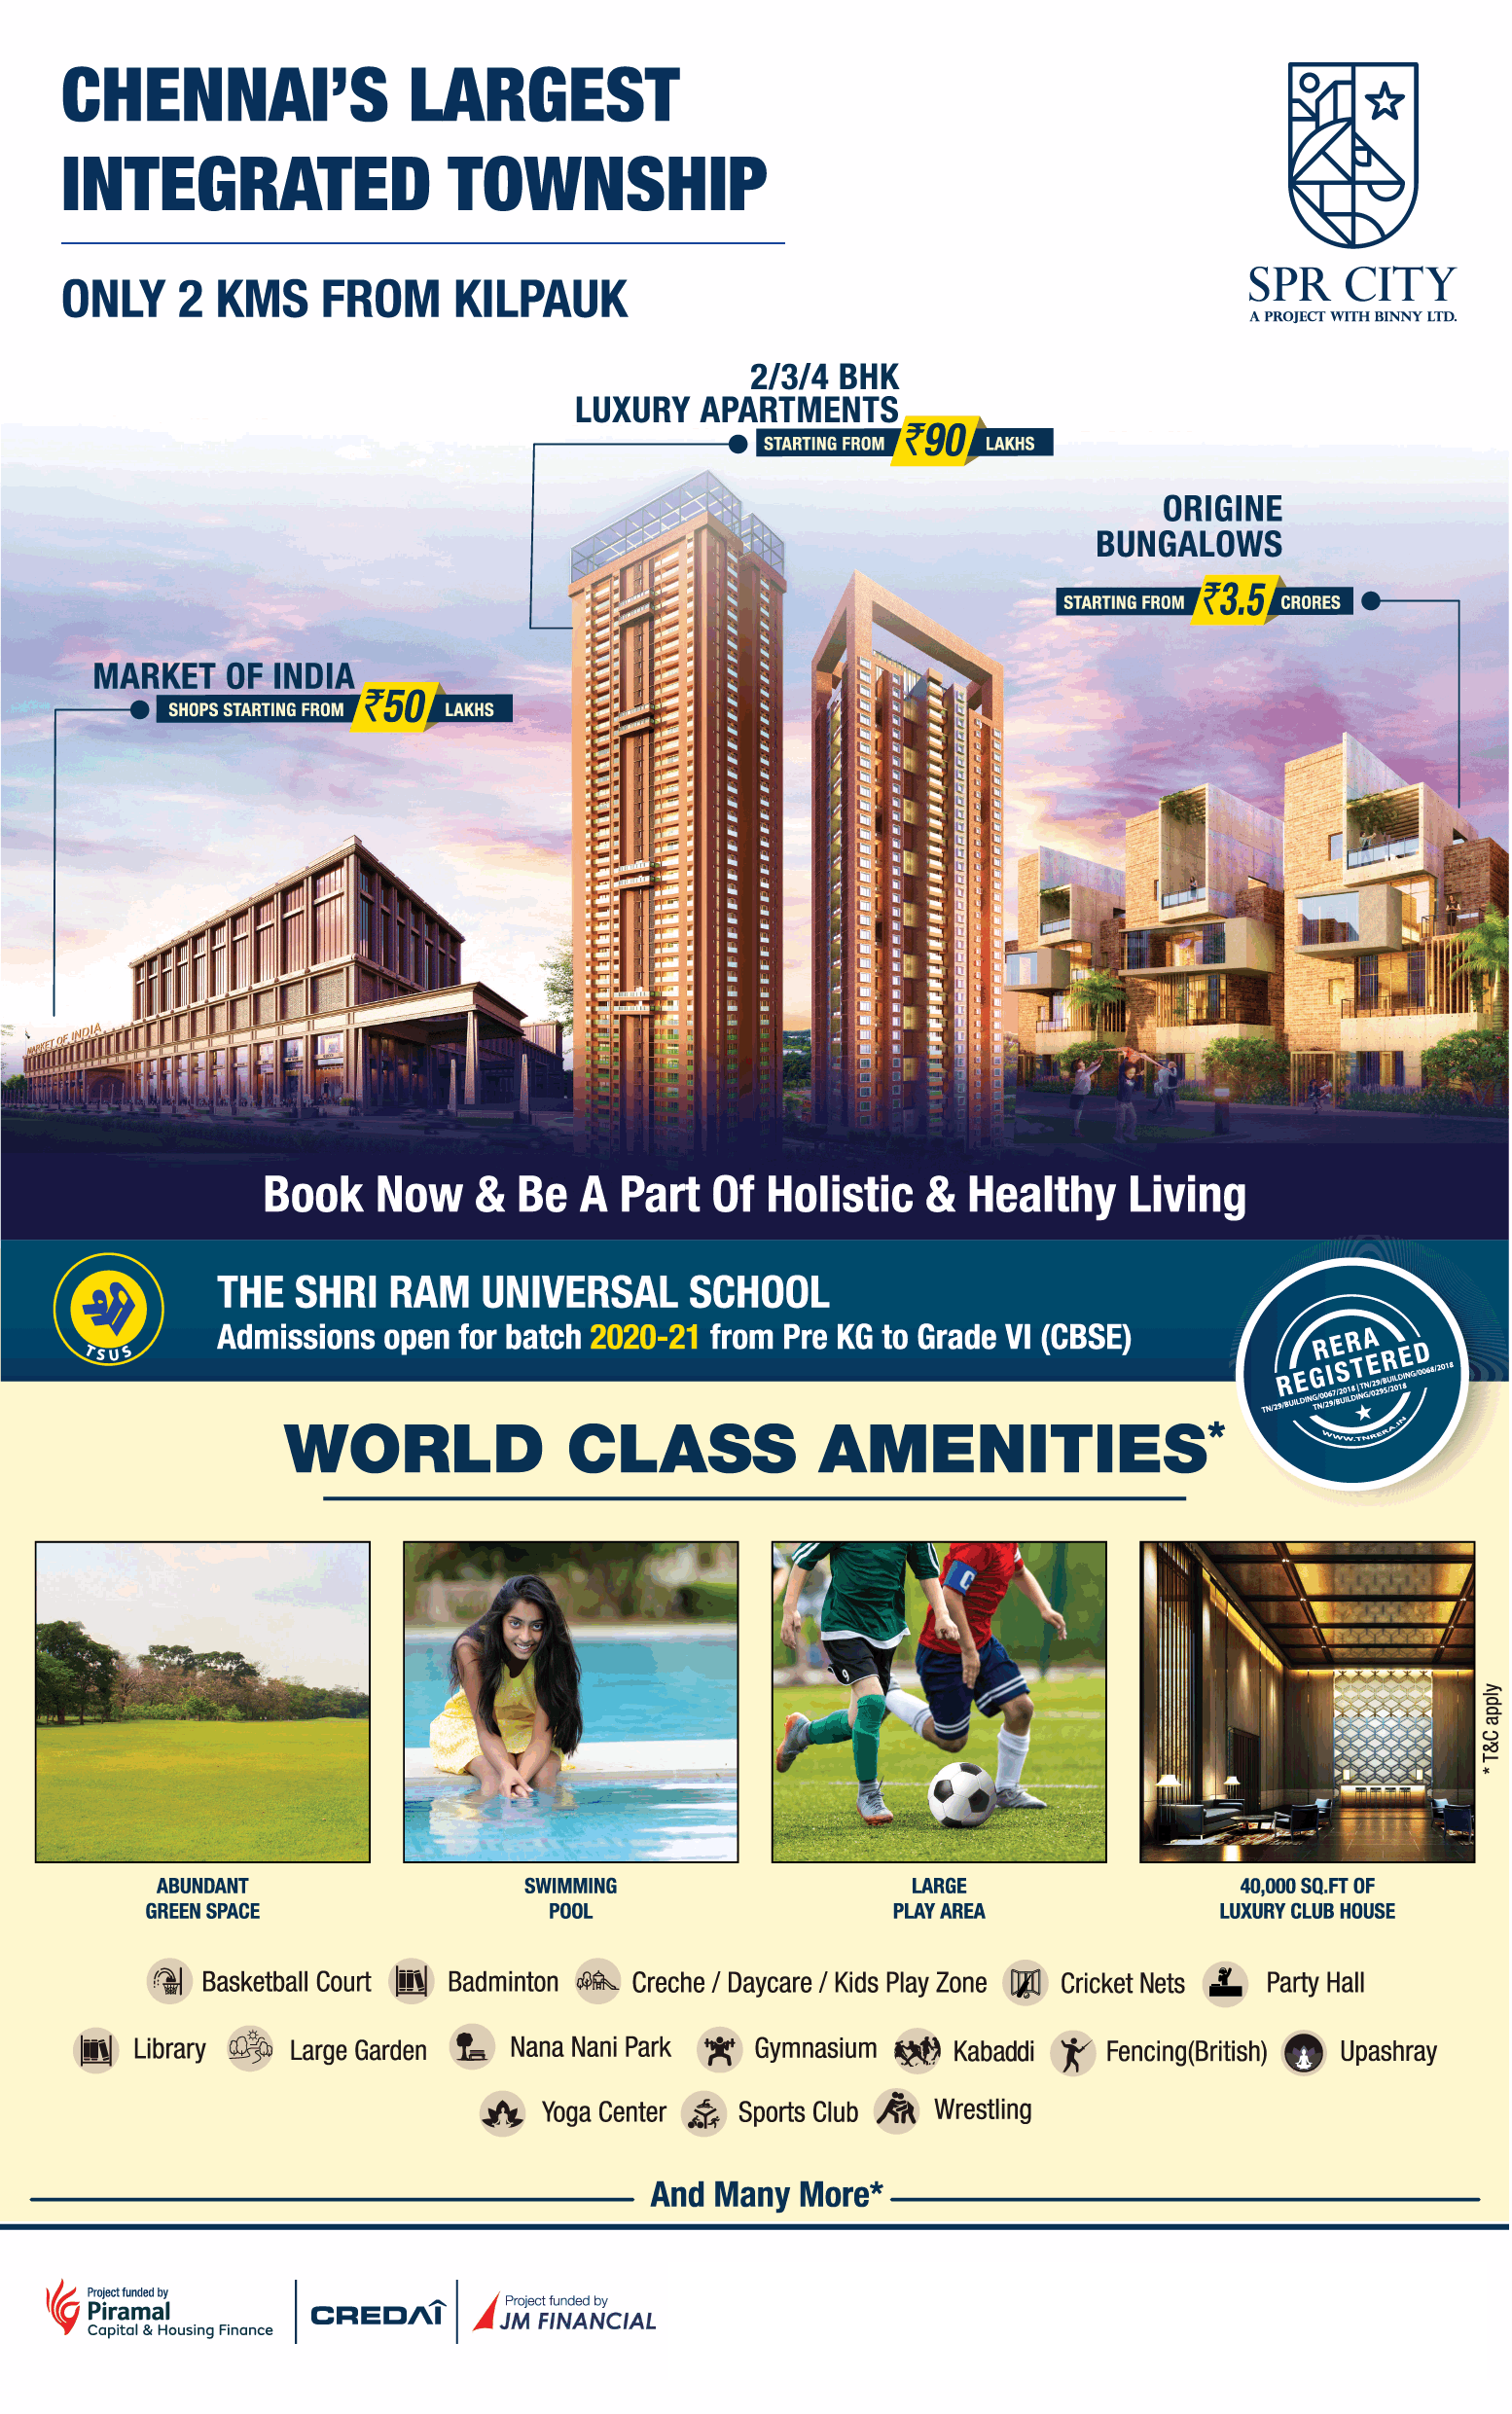 Chennai's largest integrated township at SPR City Highliving District Update